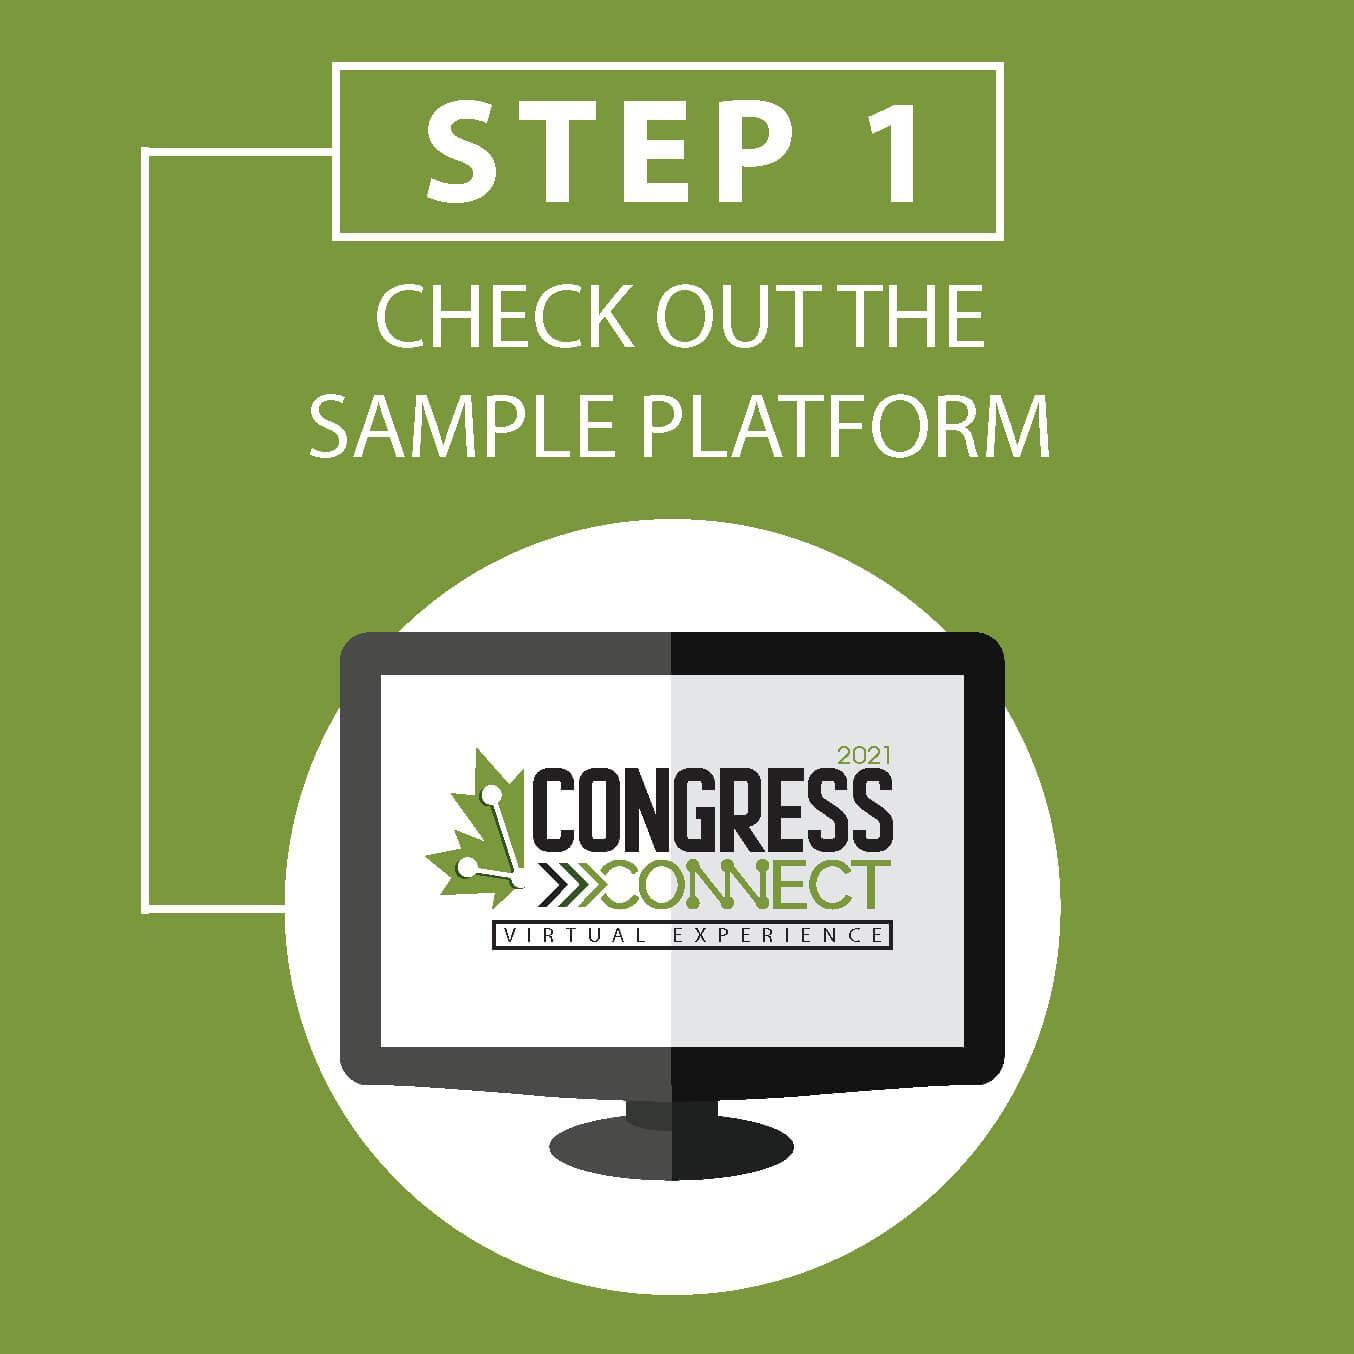 Step 1: Check out the Sample Platform